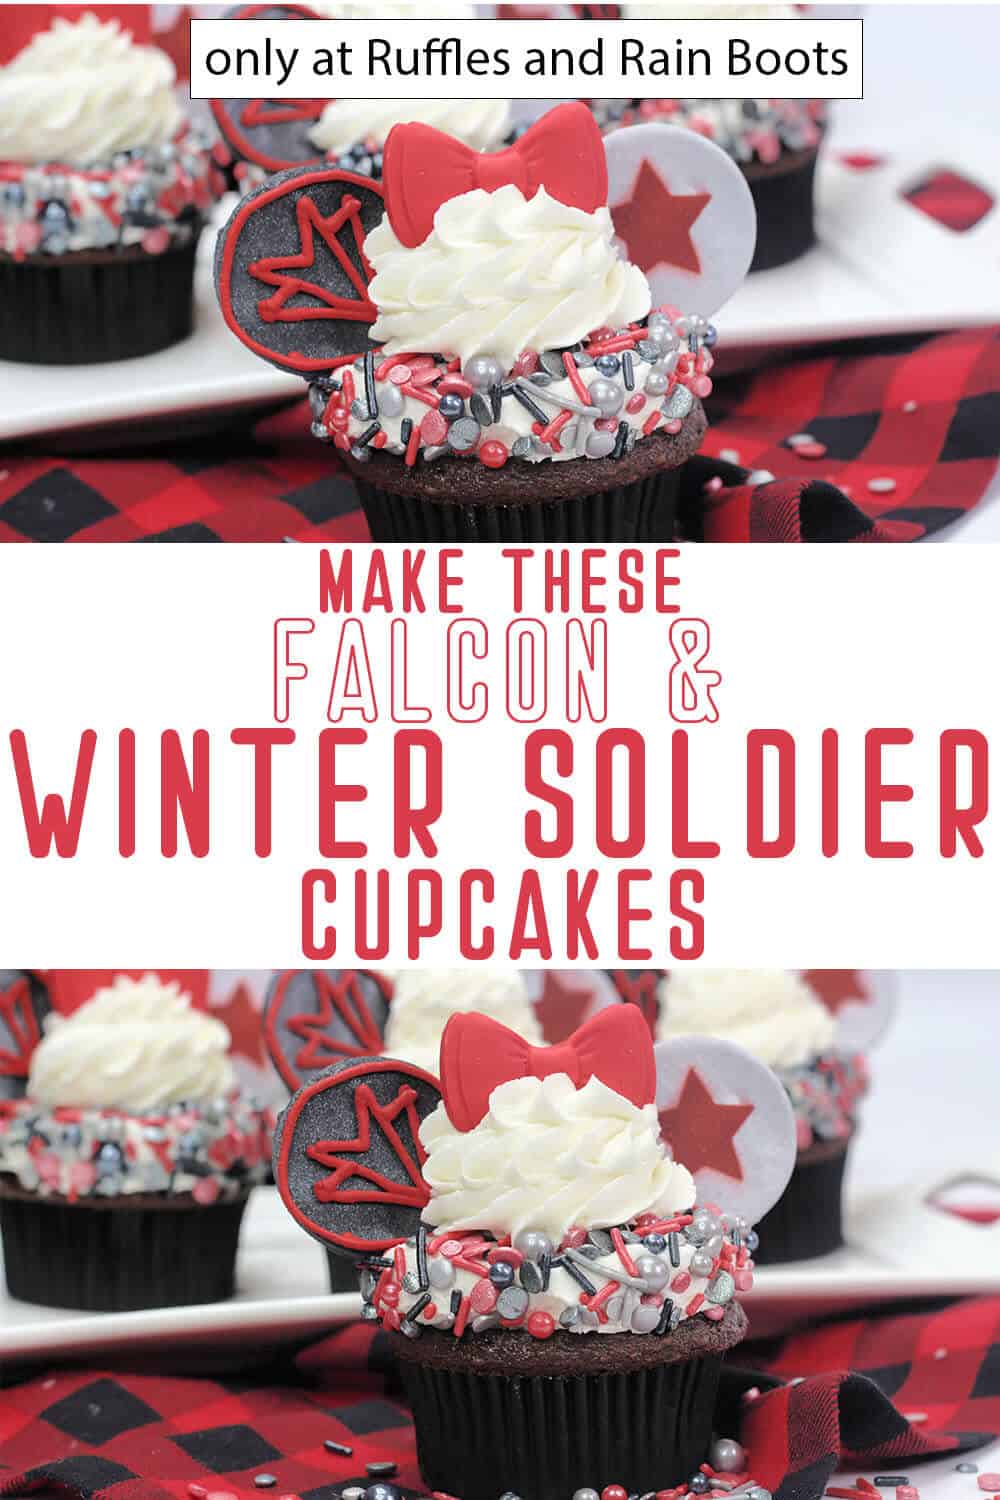 photo collage of marvel falcon and winter soldier cupcakes recipe with text which reads make these falcon & winter soldier cupcakes